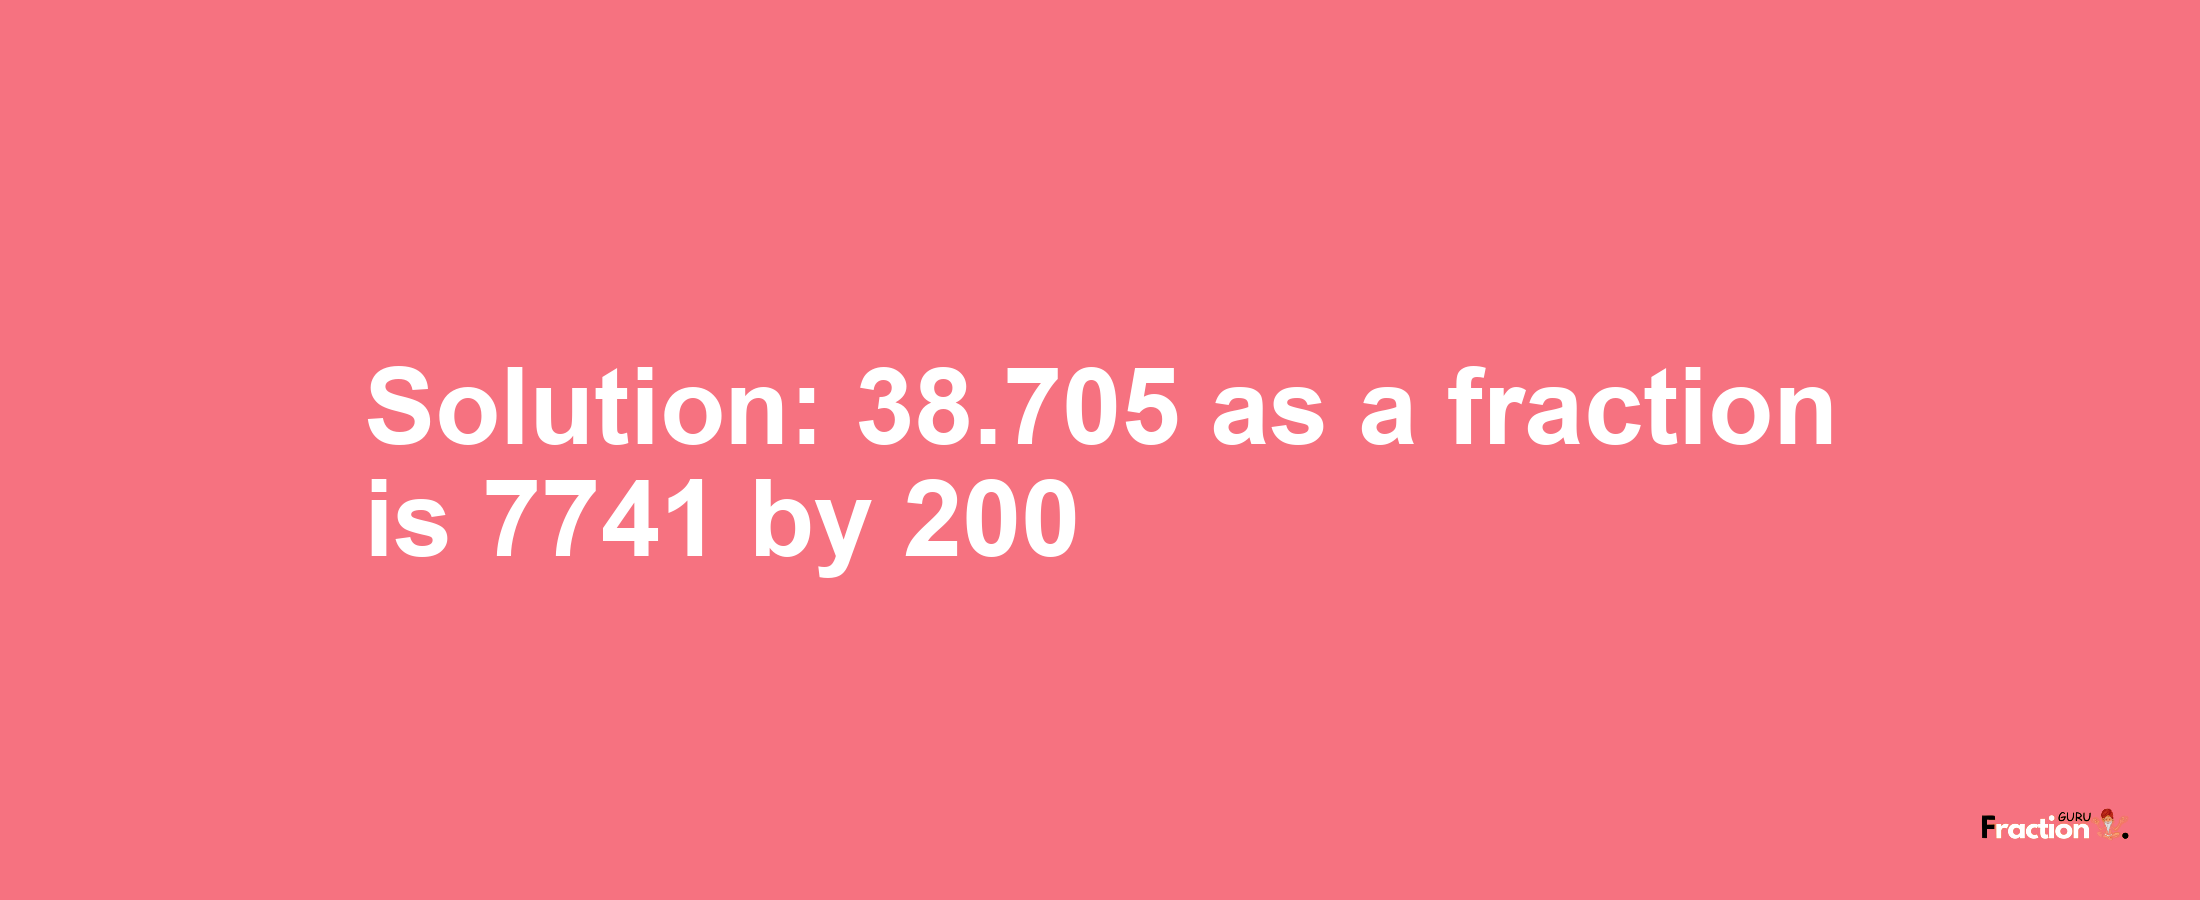 Solution:38.705 as a fraction is 7741/200